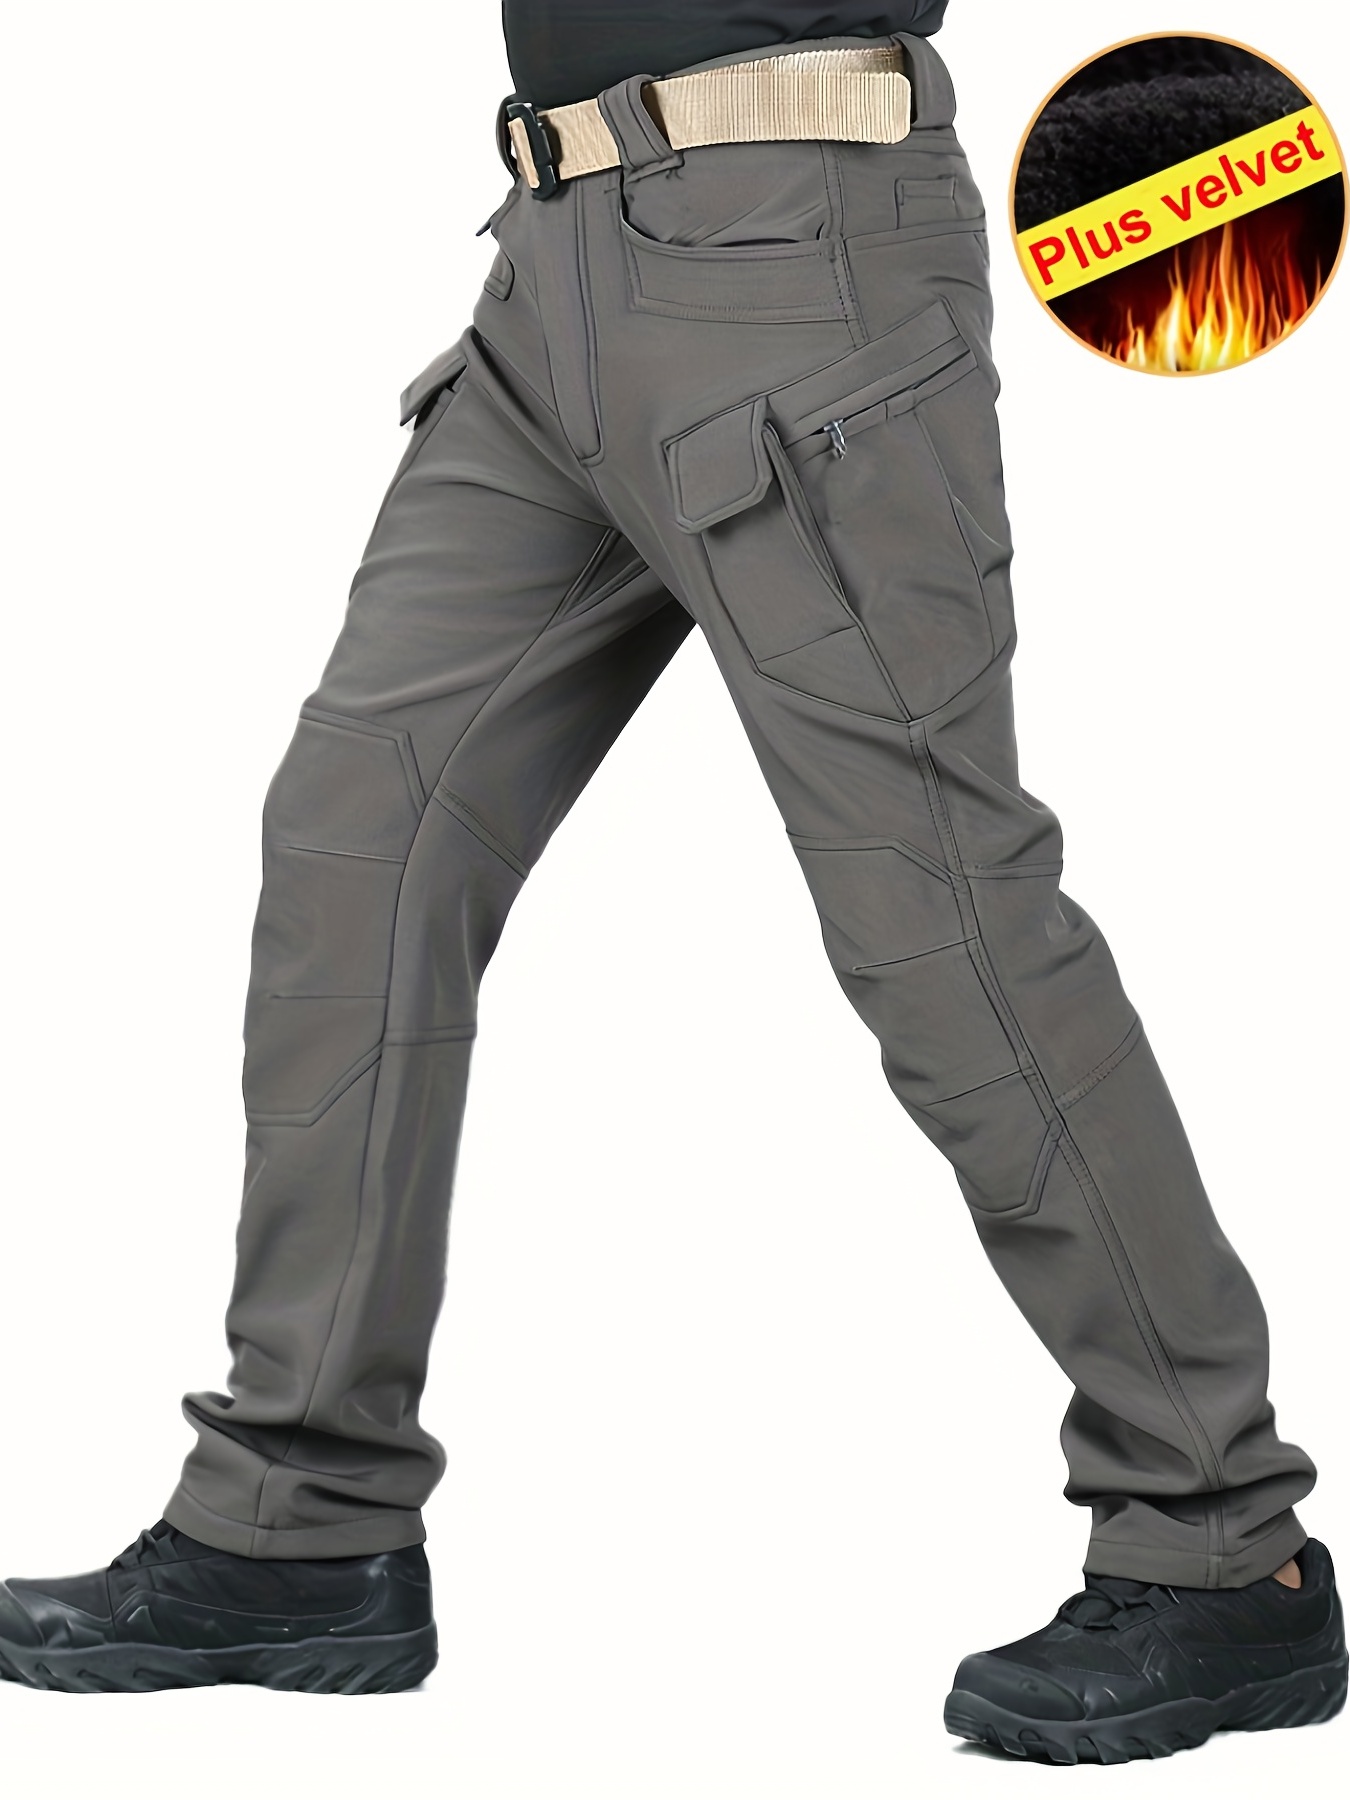 Men's Winter Warm Cargo Pants Breathable Windproof Multi Pocket Casual  Style Work Tactical Trousers PA57